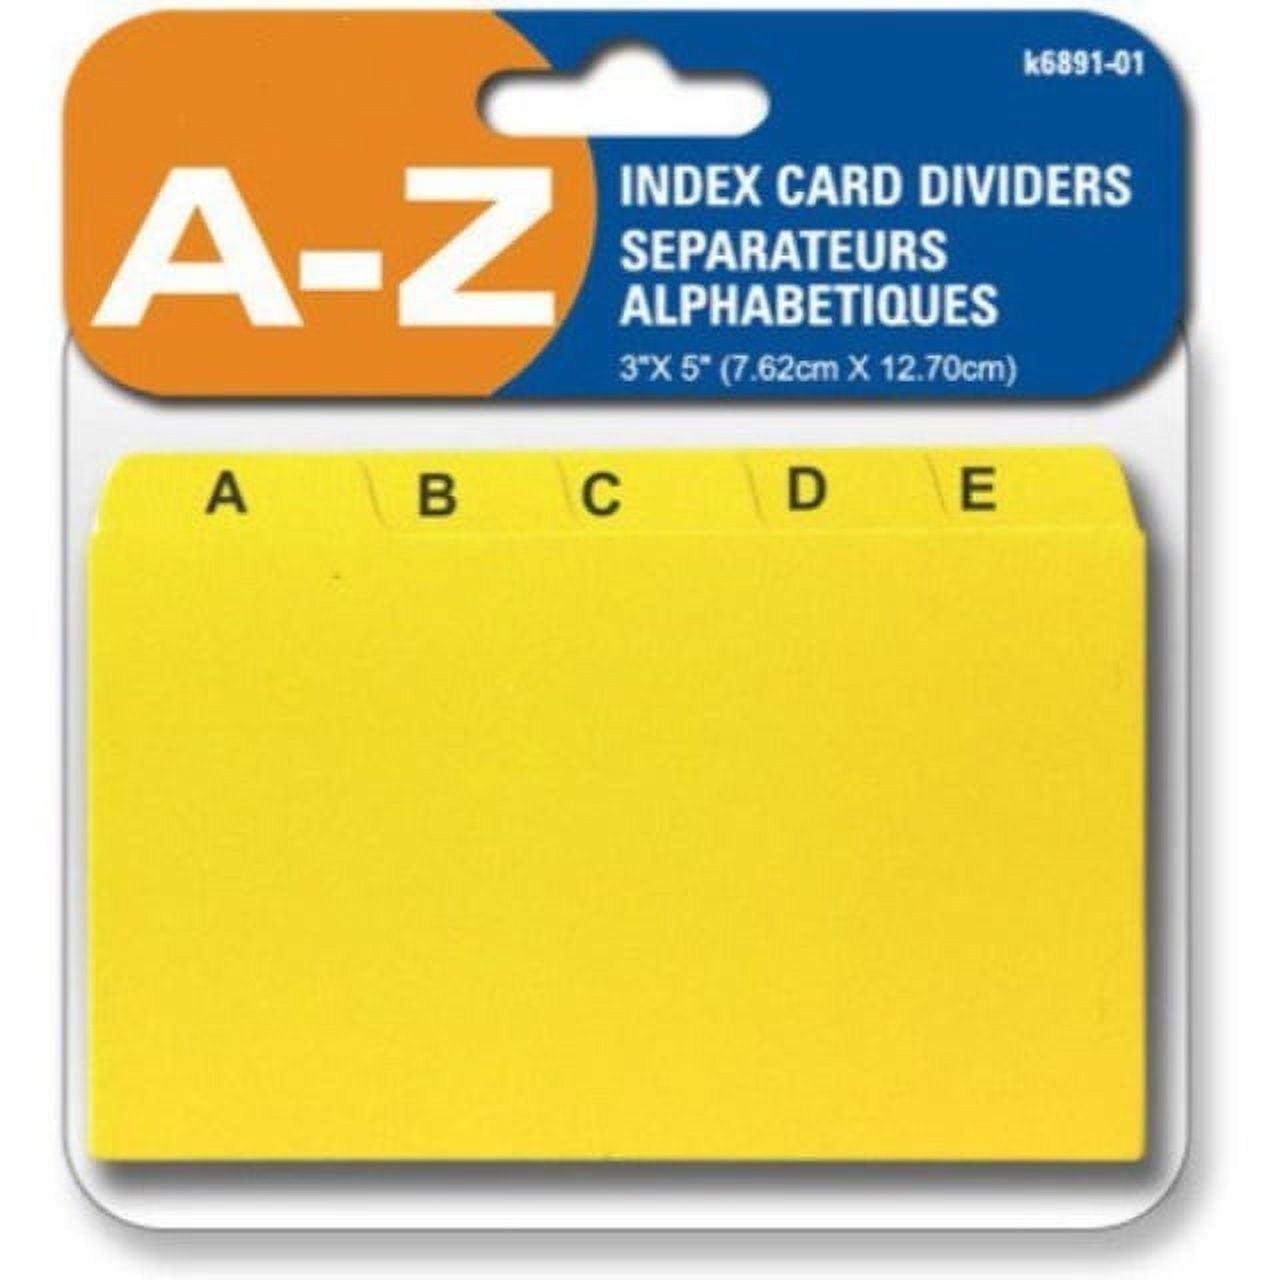 Maxgear Index Card Dividers 4 X 6 Inches Alphabetical Tabbed Index